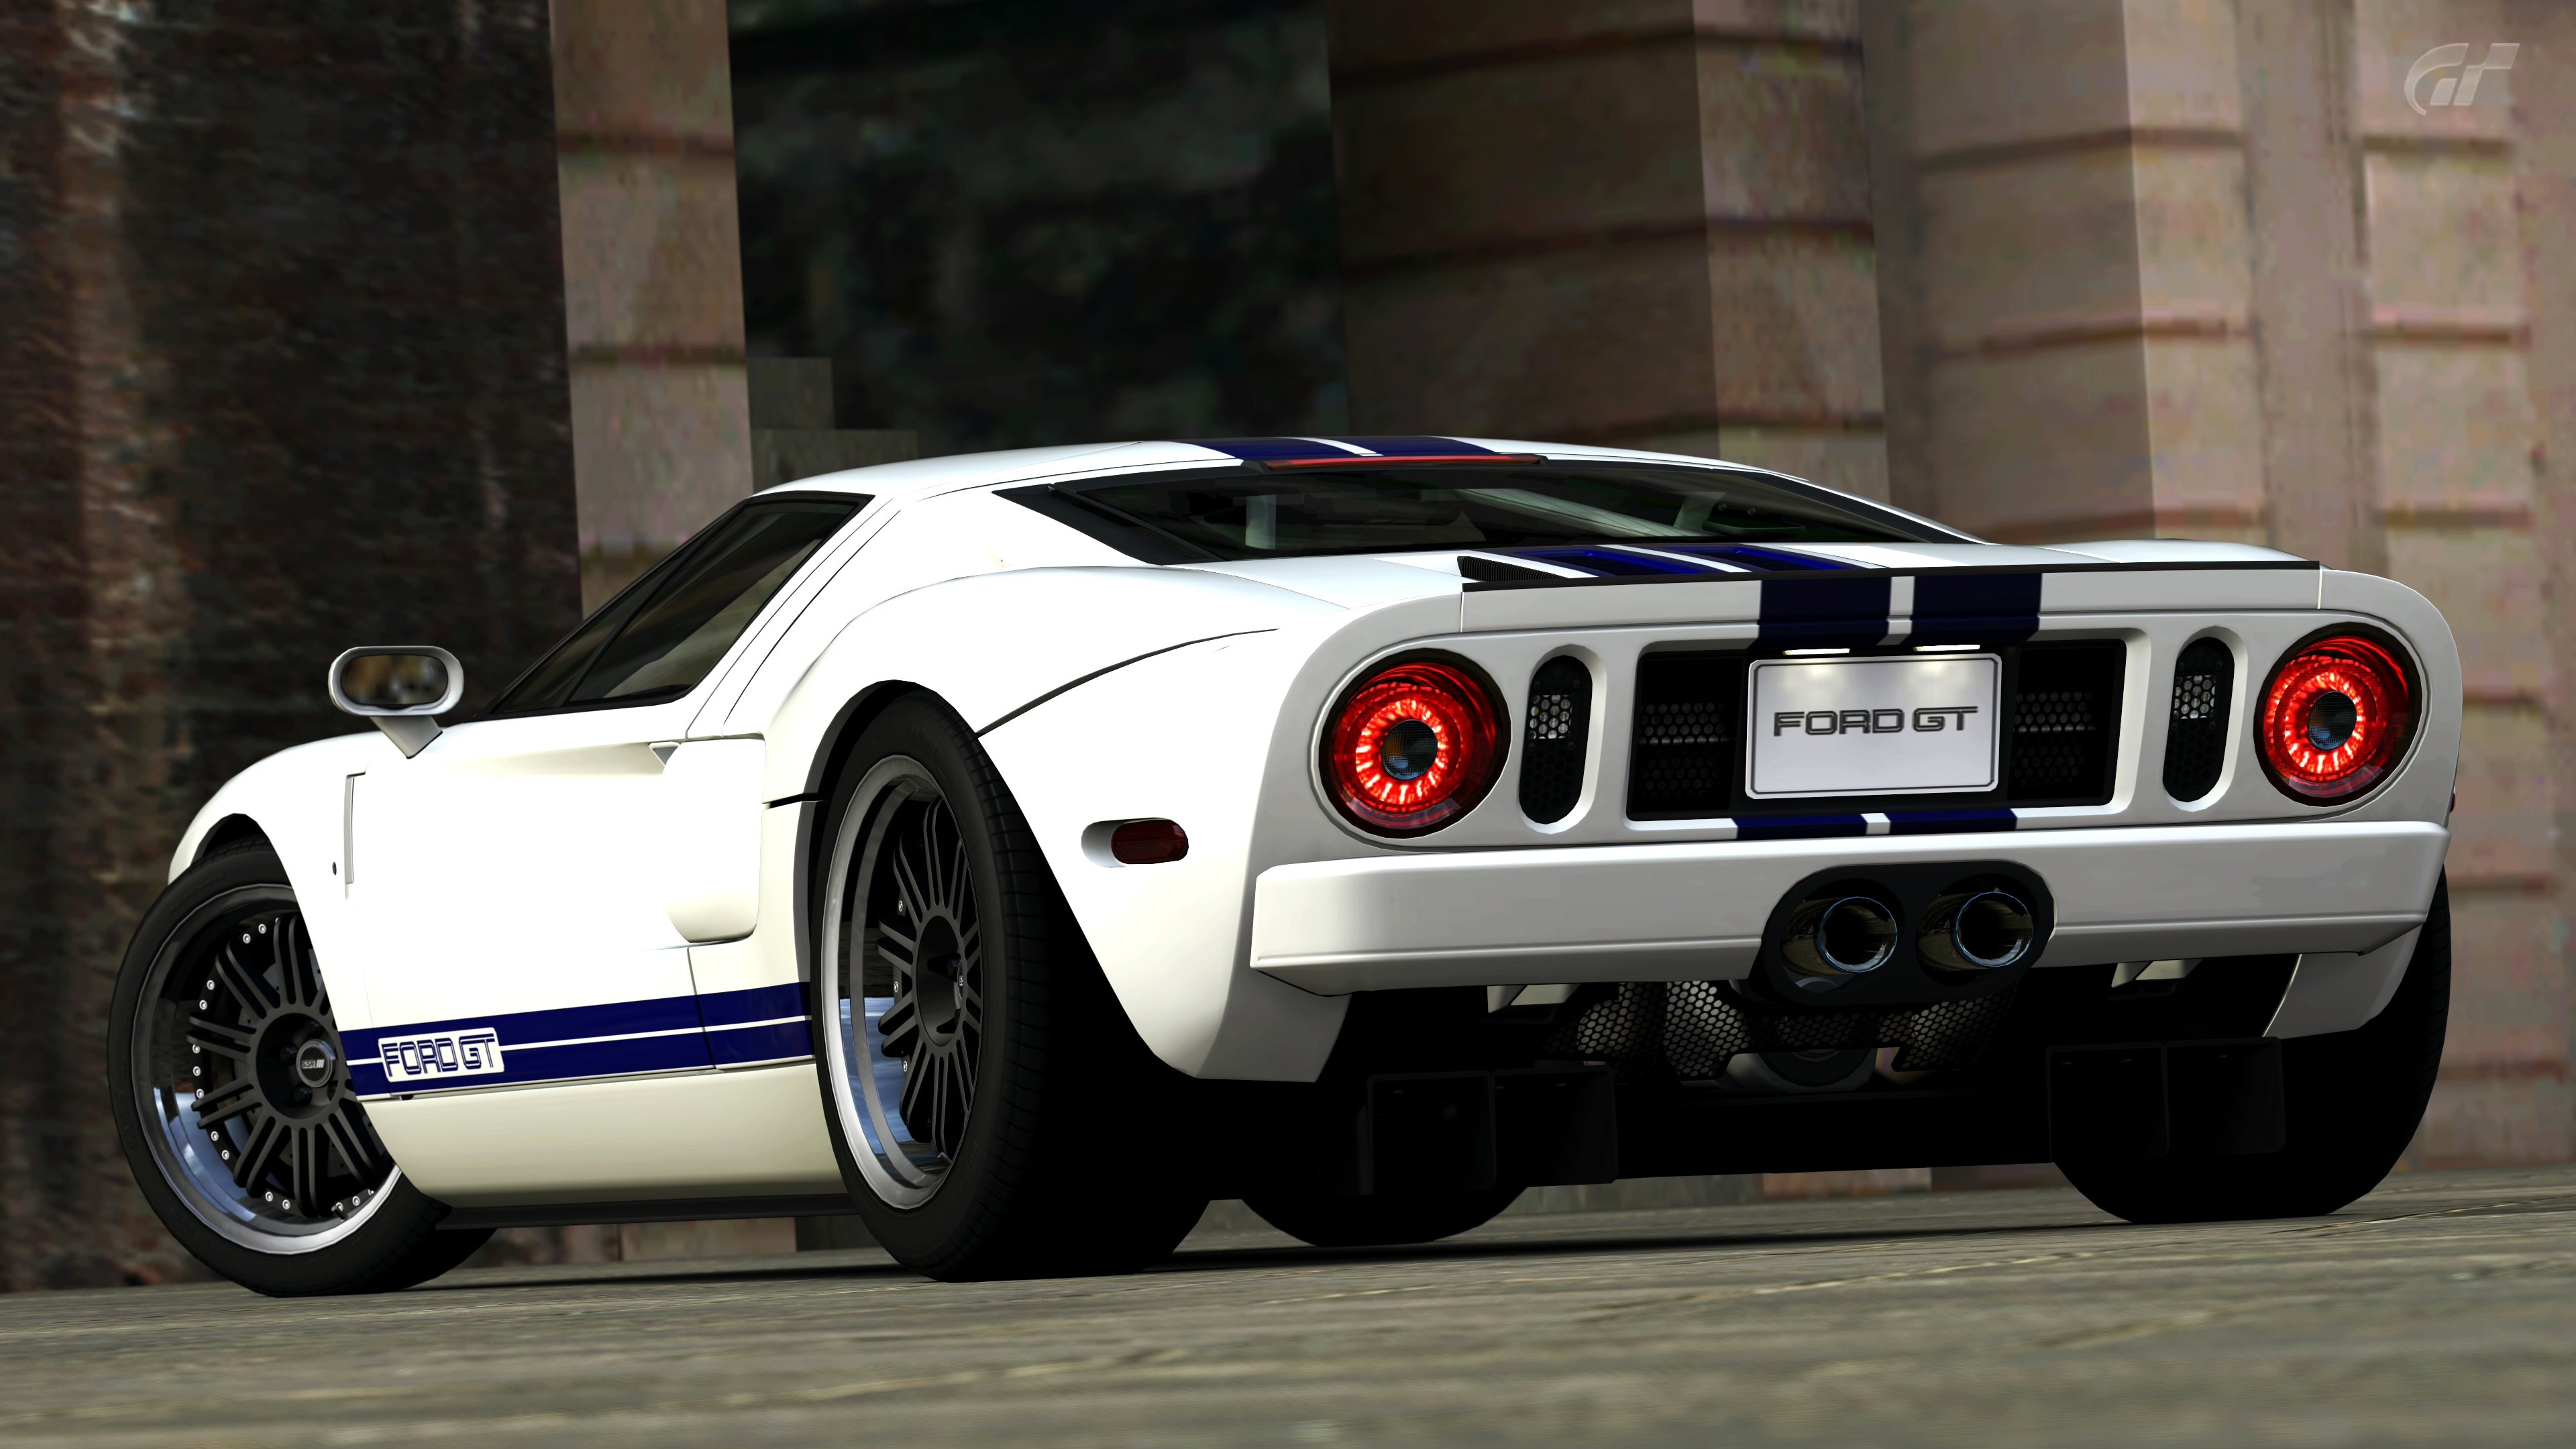 3840x2160 Ford GT download wallpaper